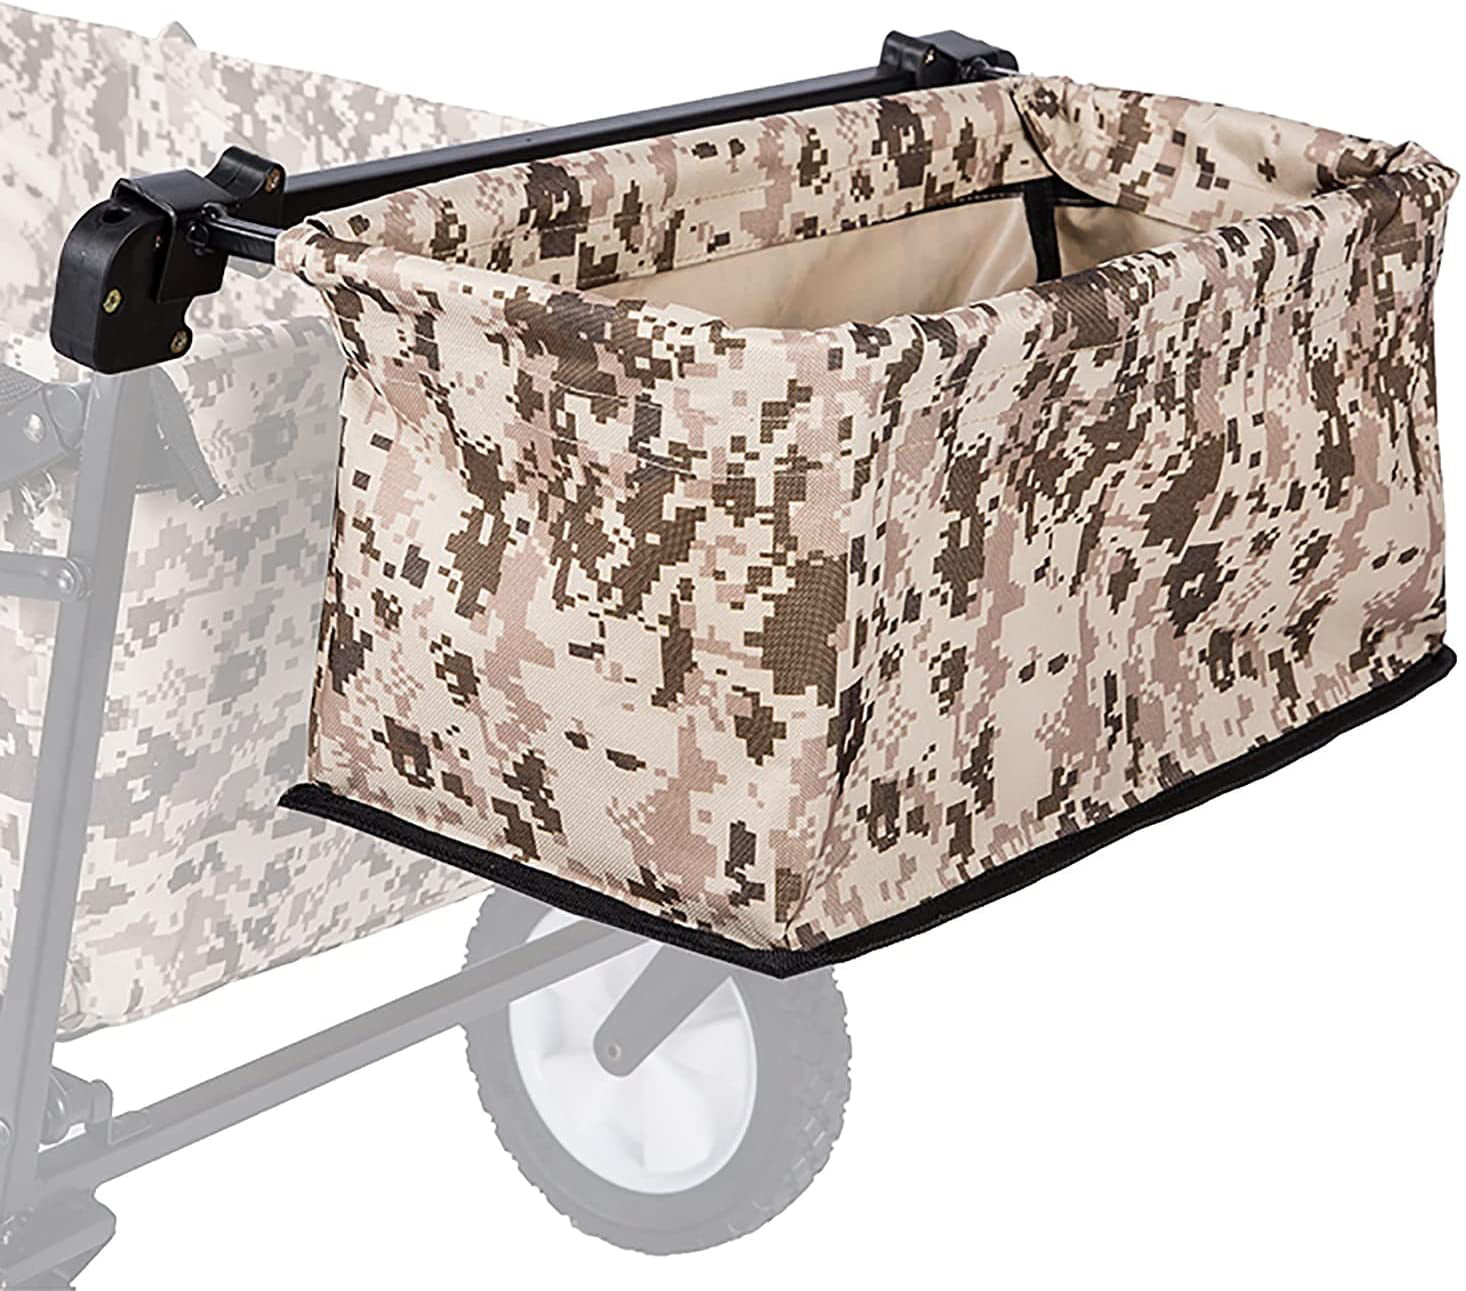 Folding Cargo Wagon Cart Storage Bags Trolley Accessories Portable Oxford Cloth Tail Pocket Push Pull Wagon Basket for Kids Beach Garden Outdoor Camping Shopping 